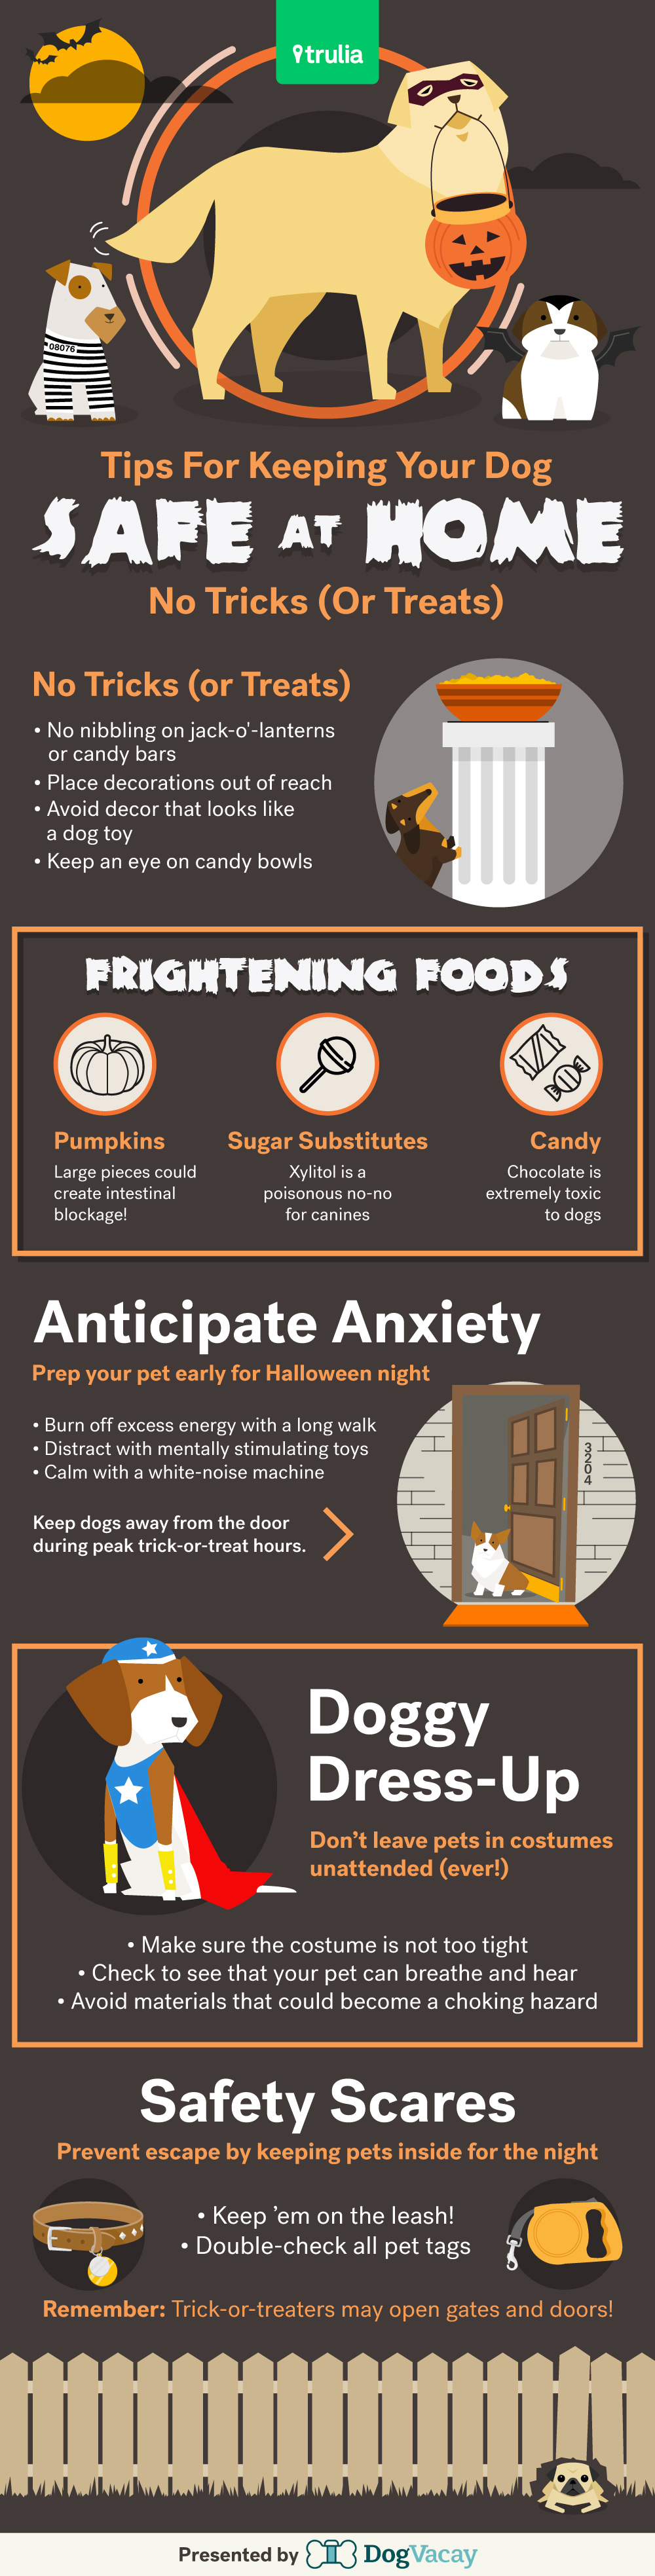 DogVacay halloween safety tips